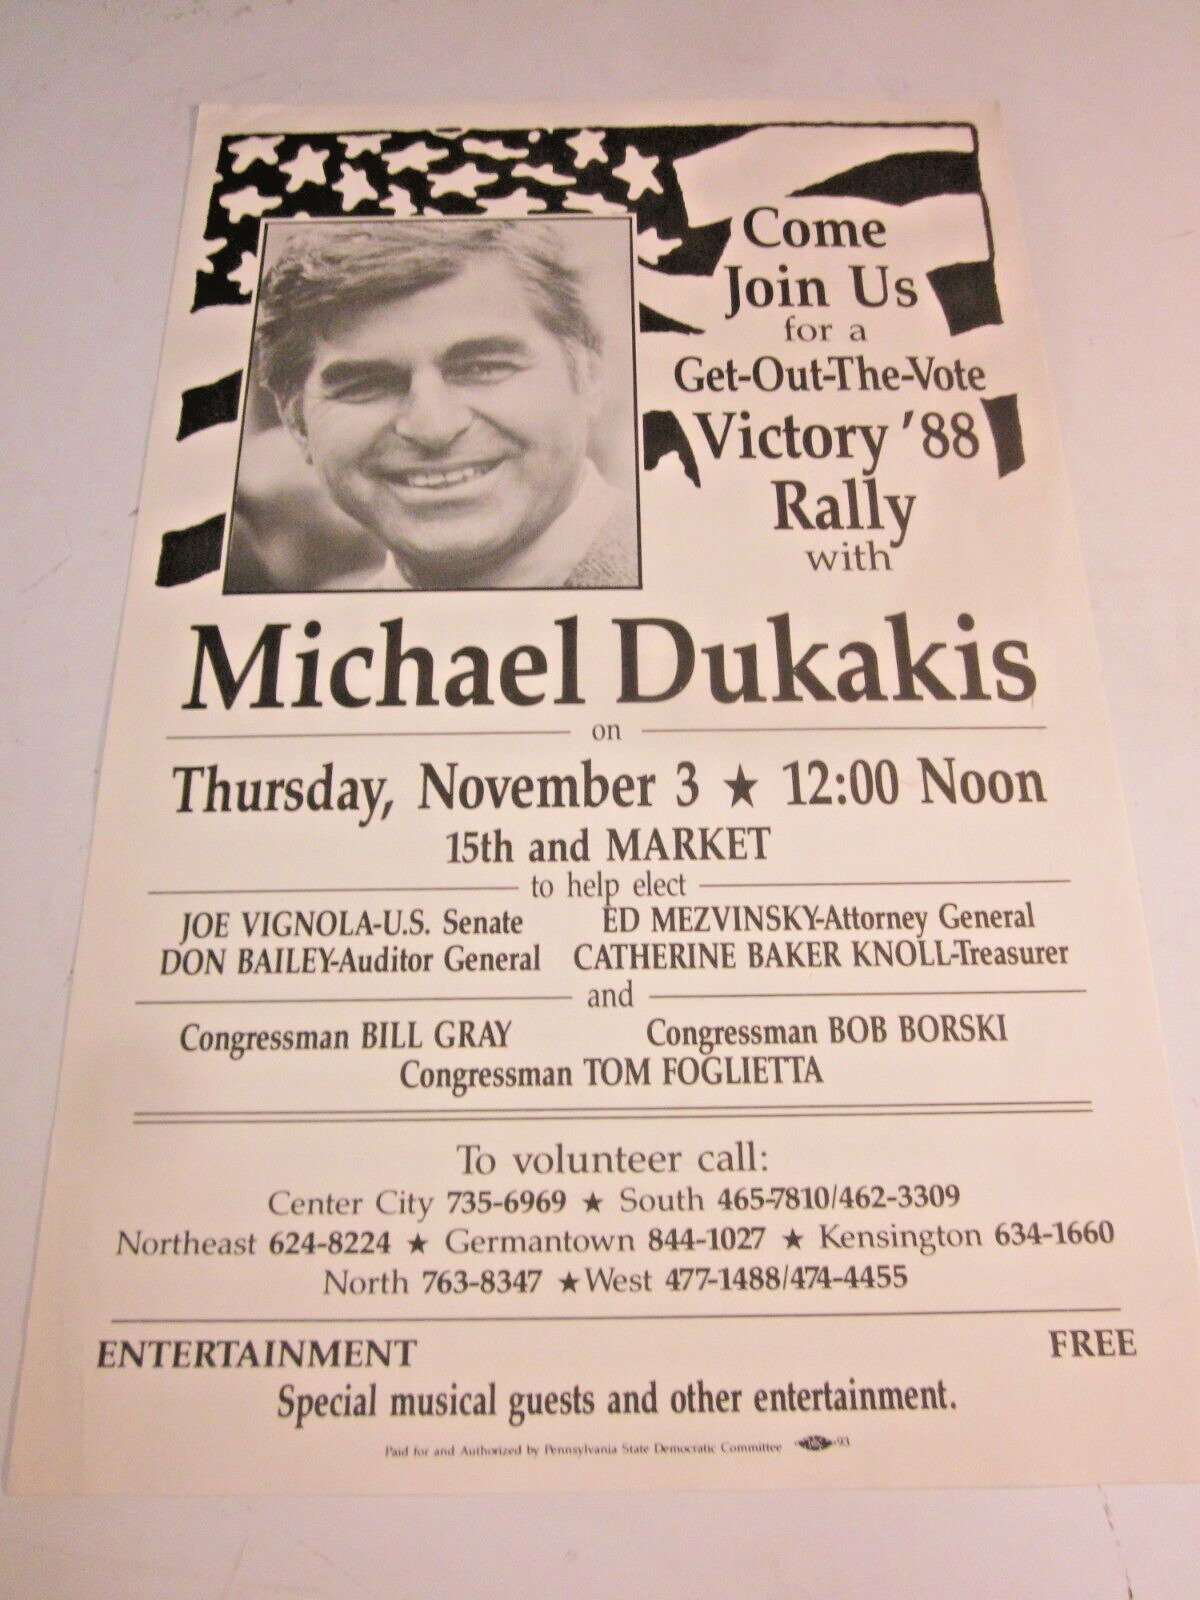 Michael Dukakis Presidential Campaign Poster  1988 Election